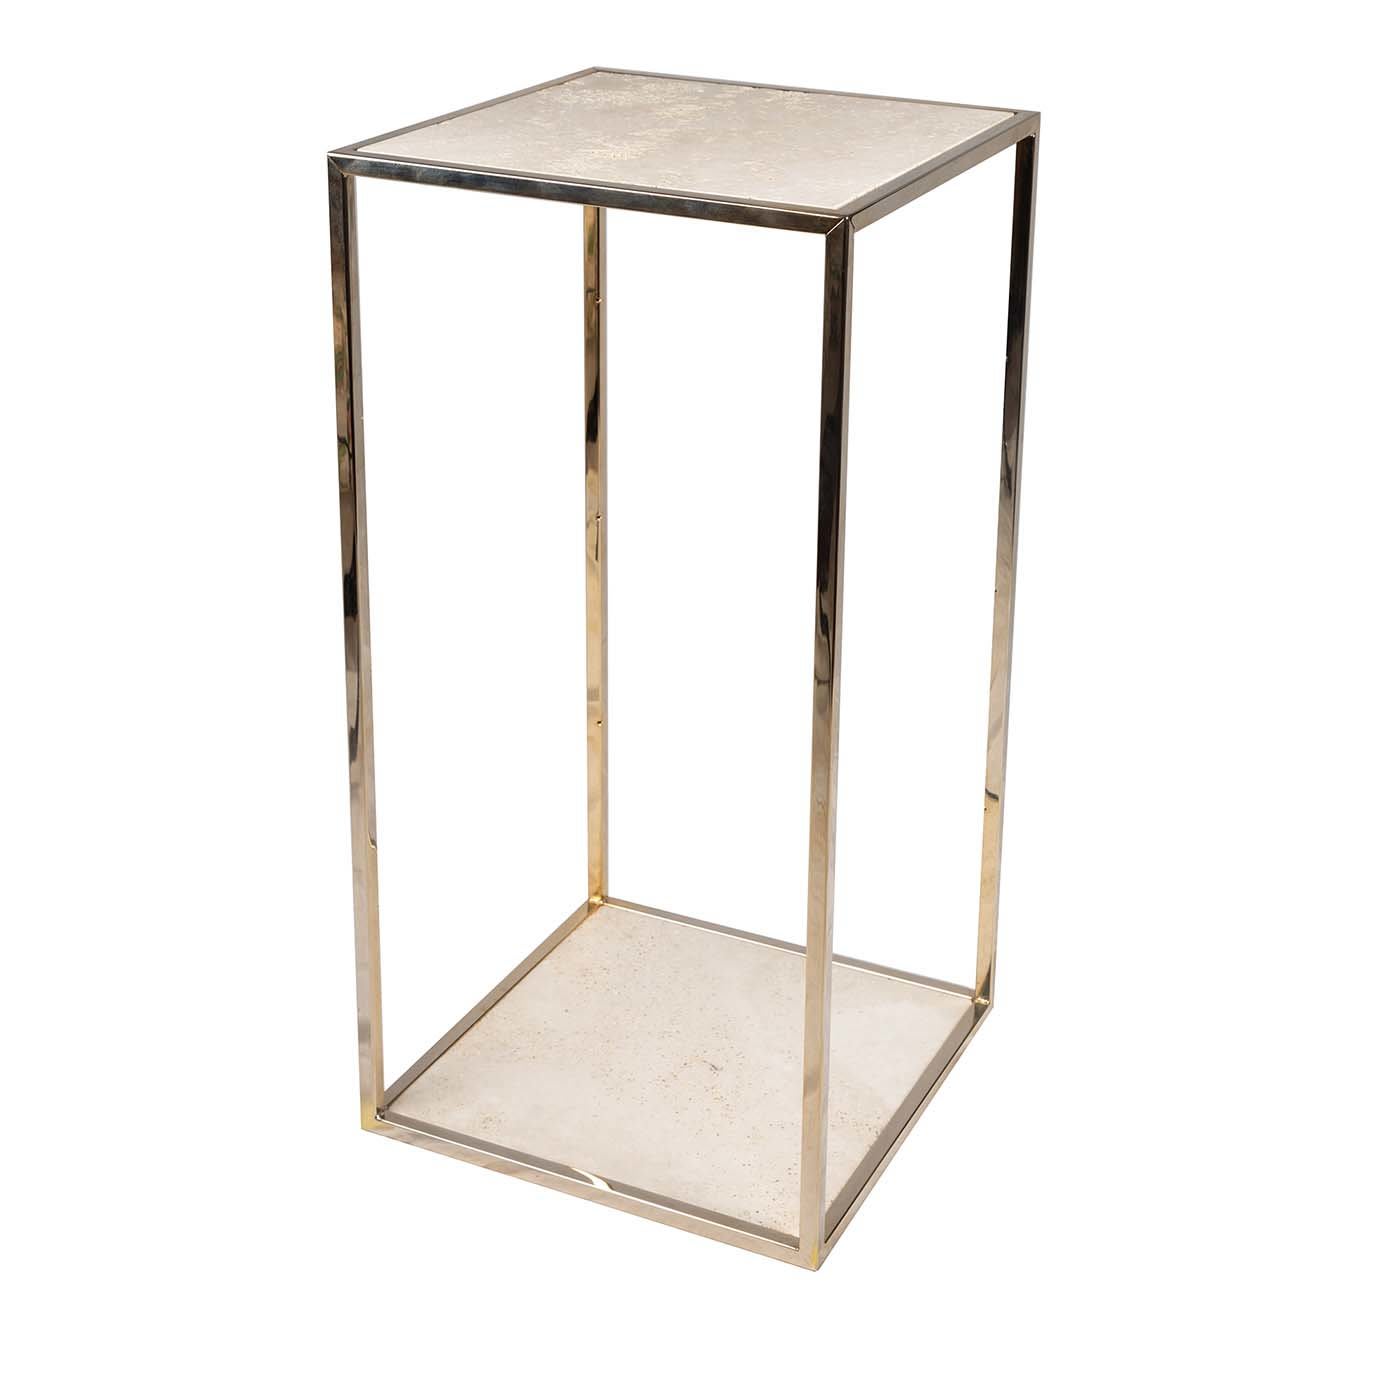 Cube high side table with gold finish - Cube3